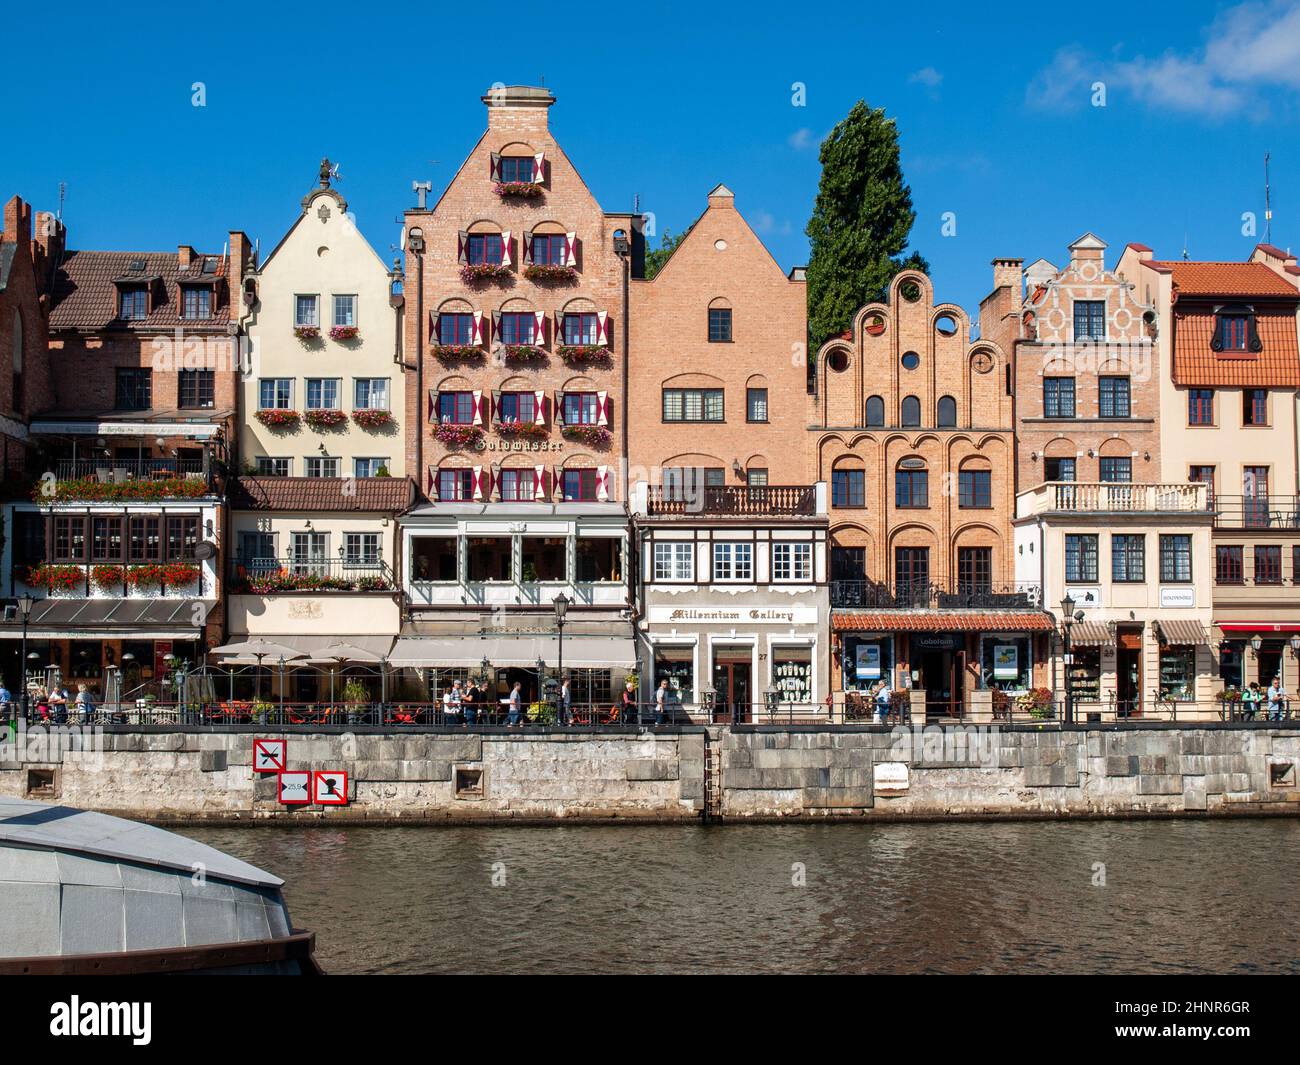 Gdansk, Old Town - historic buildings along the riverbank of Motlawa River Stock Photo